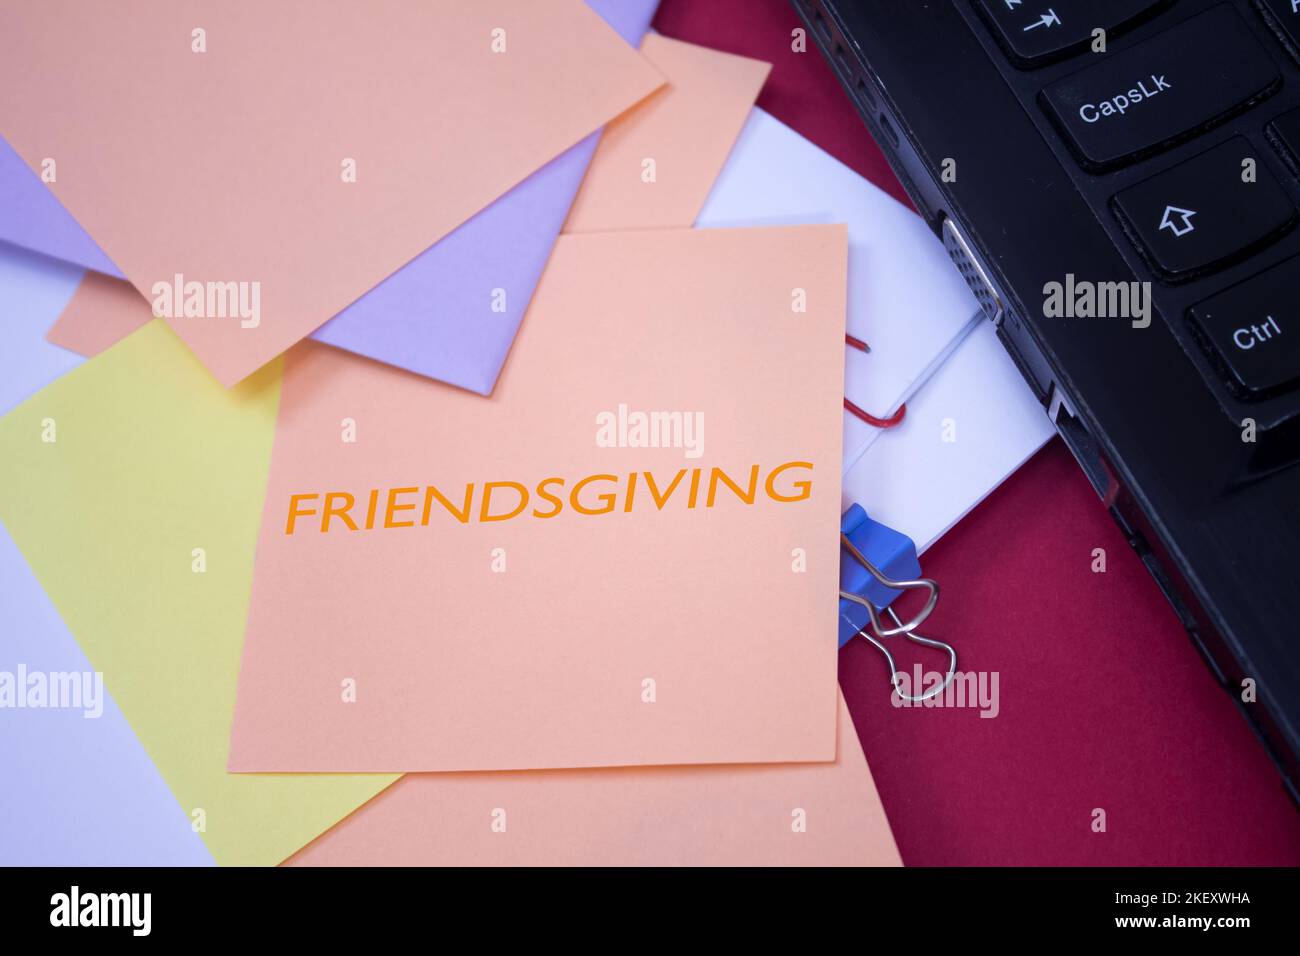 Friendsgiving. Text on adhesive note paper. Event, celebration reminder message. Stock Photo